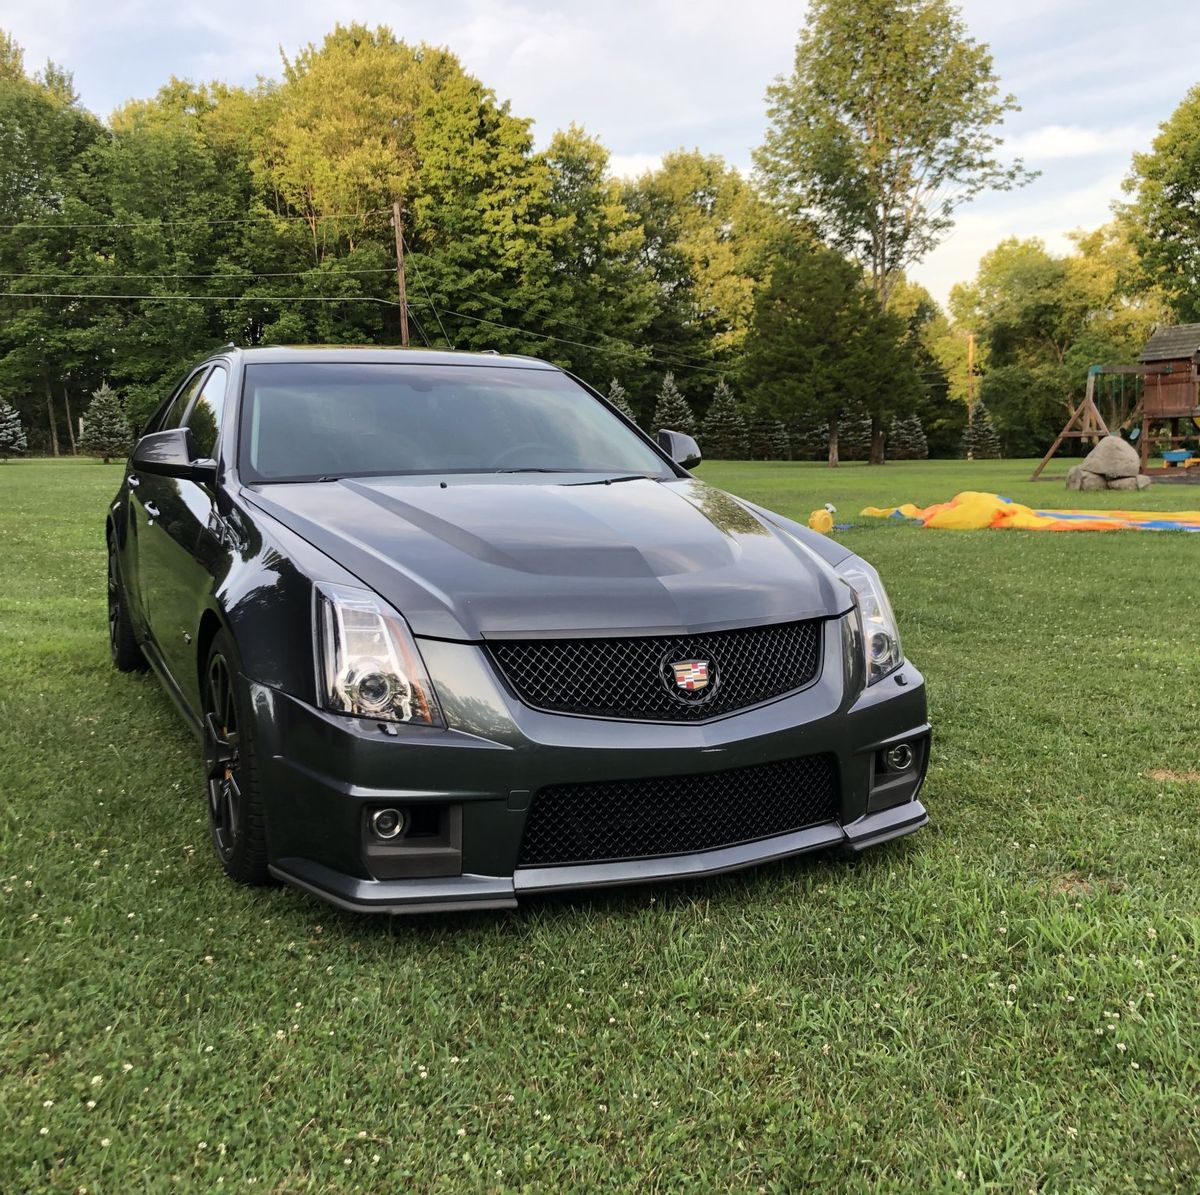 This Manual Cadillac CTS-V Wagon Is the Enthusiast's Dream